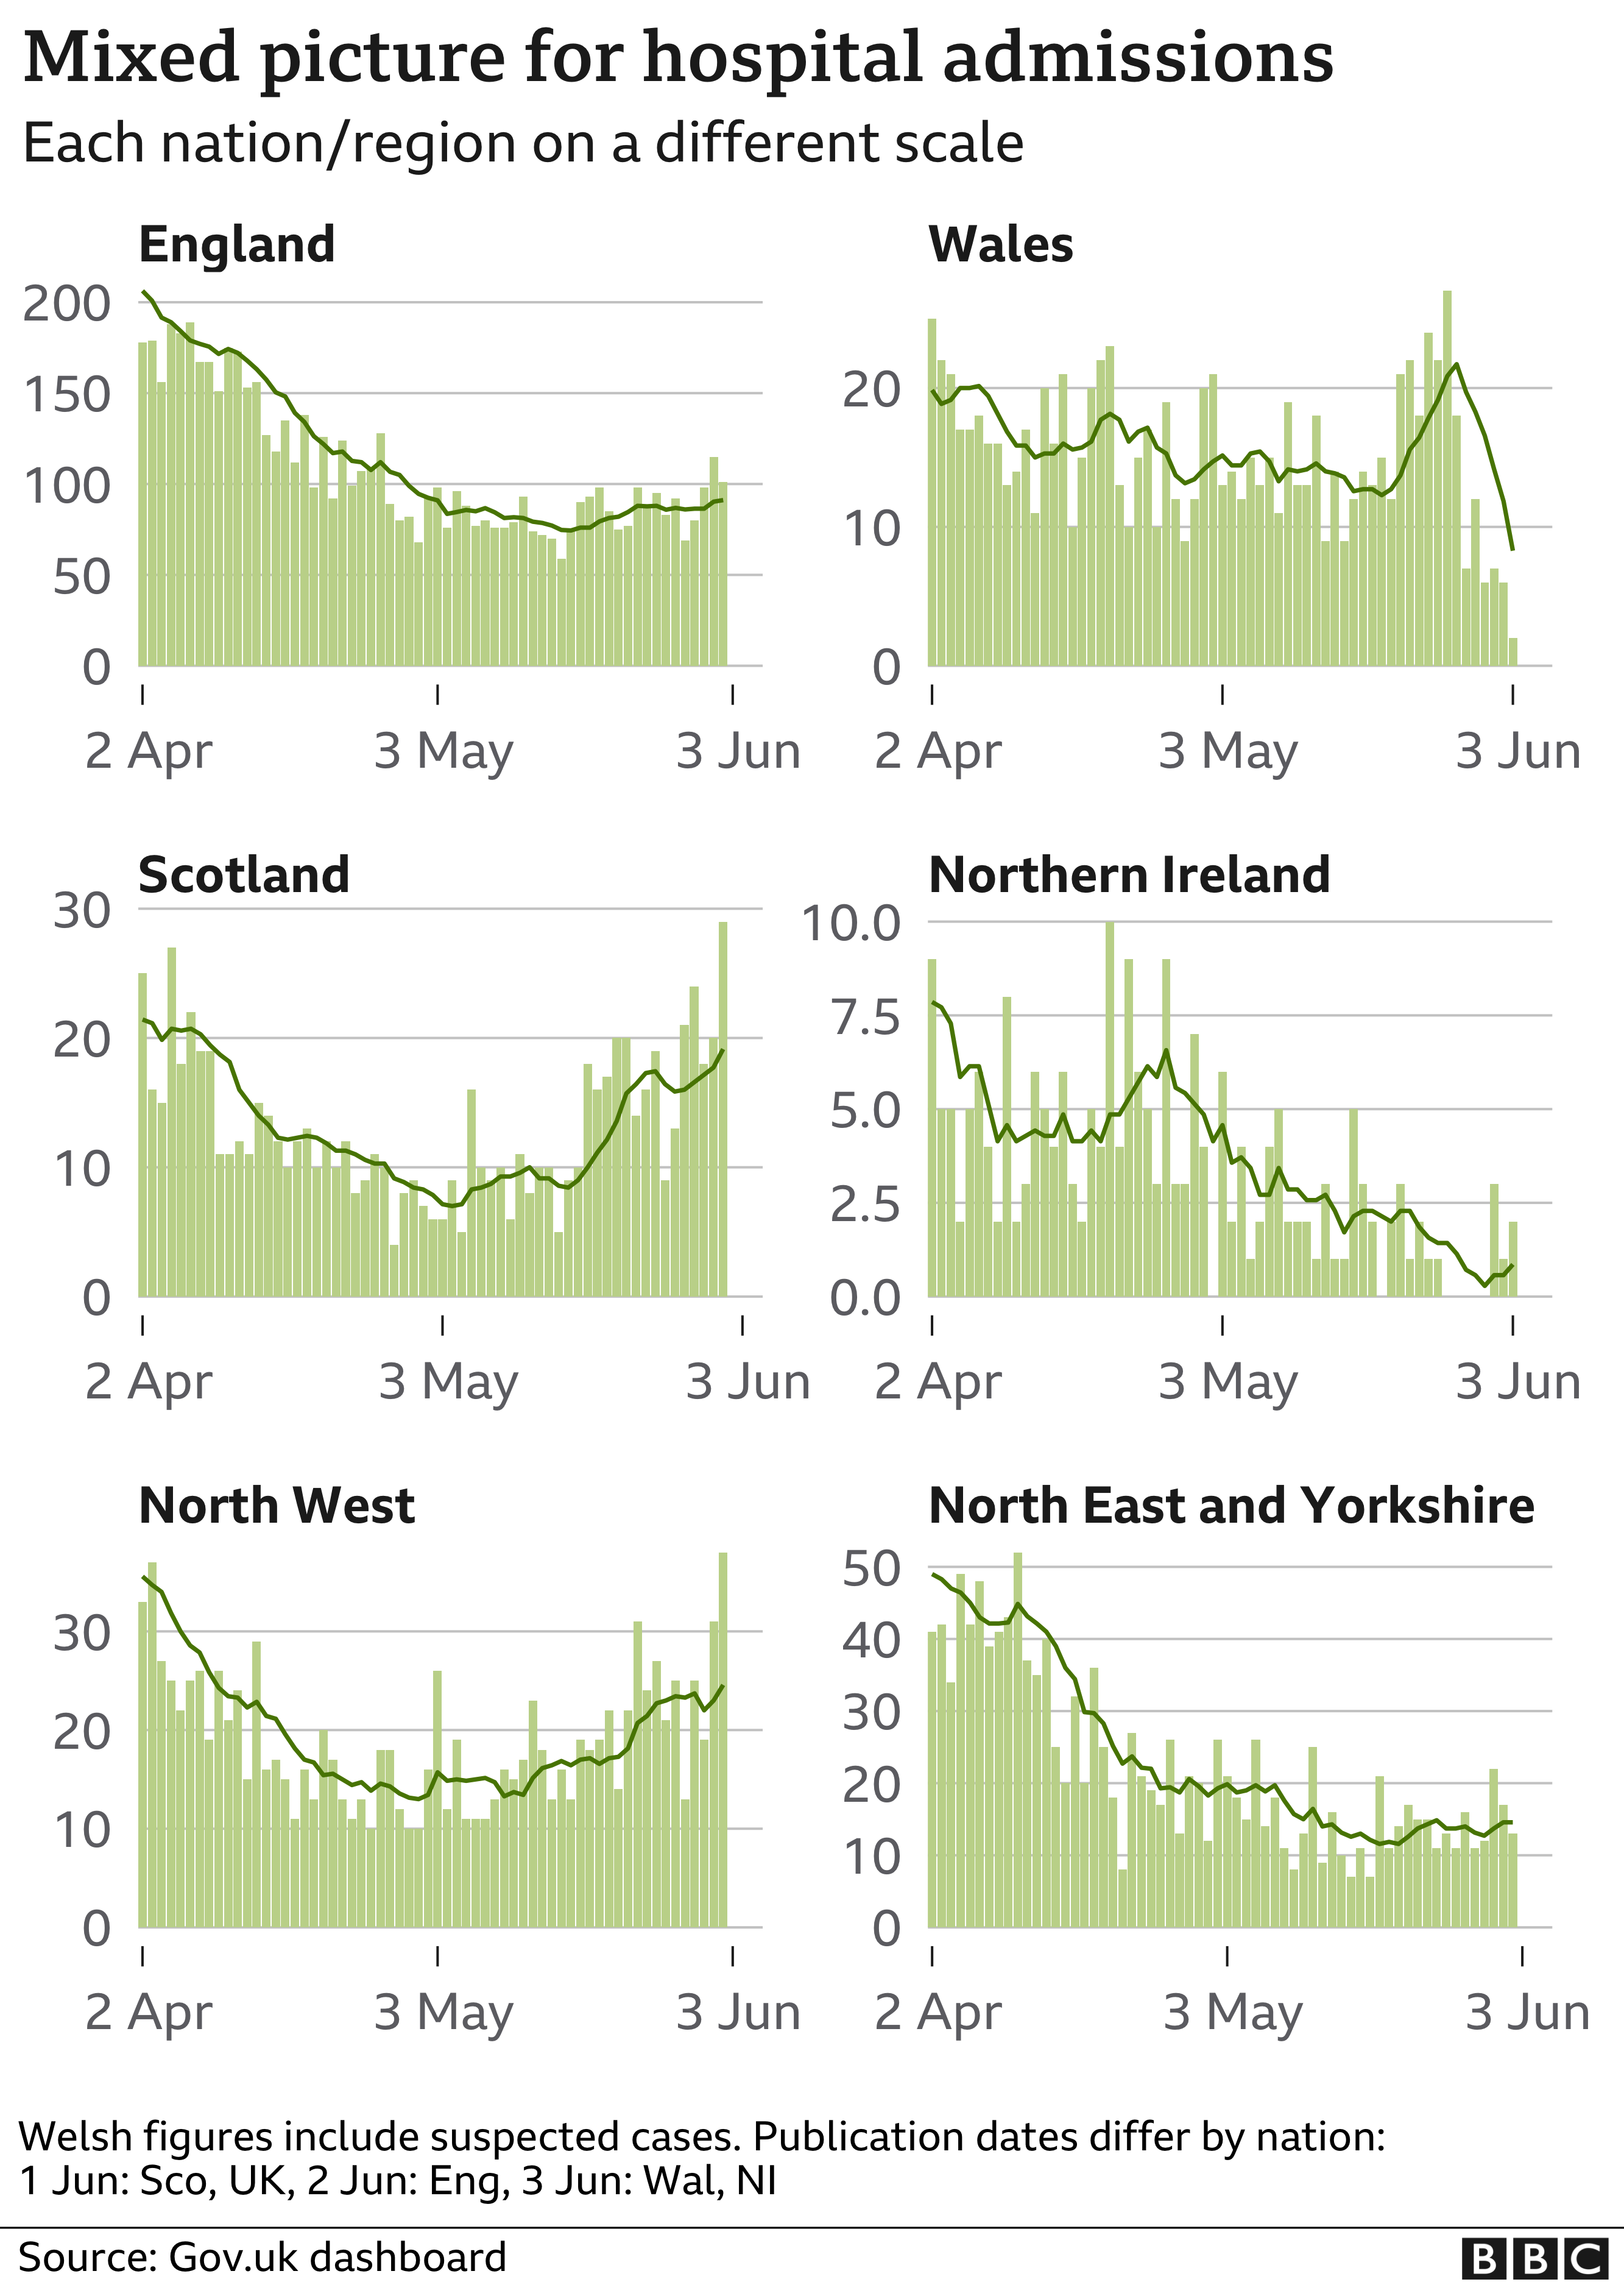 chart: mixed picture of hospital admissions across the UK - flat in England, rising in Scotland, falling in Wales and Northern Ireland